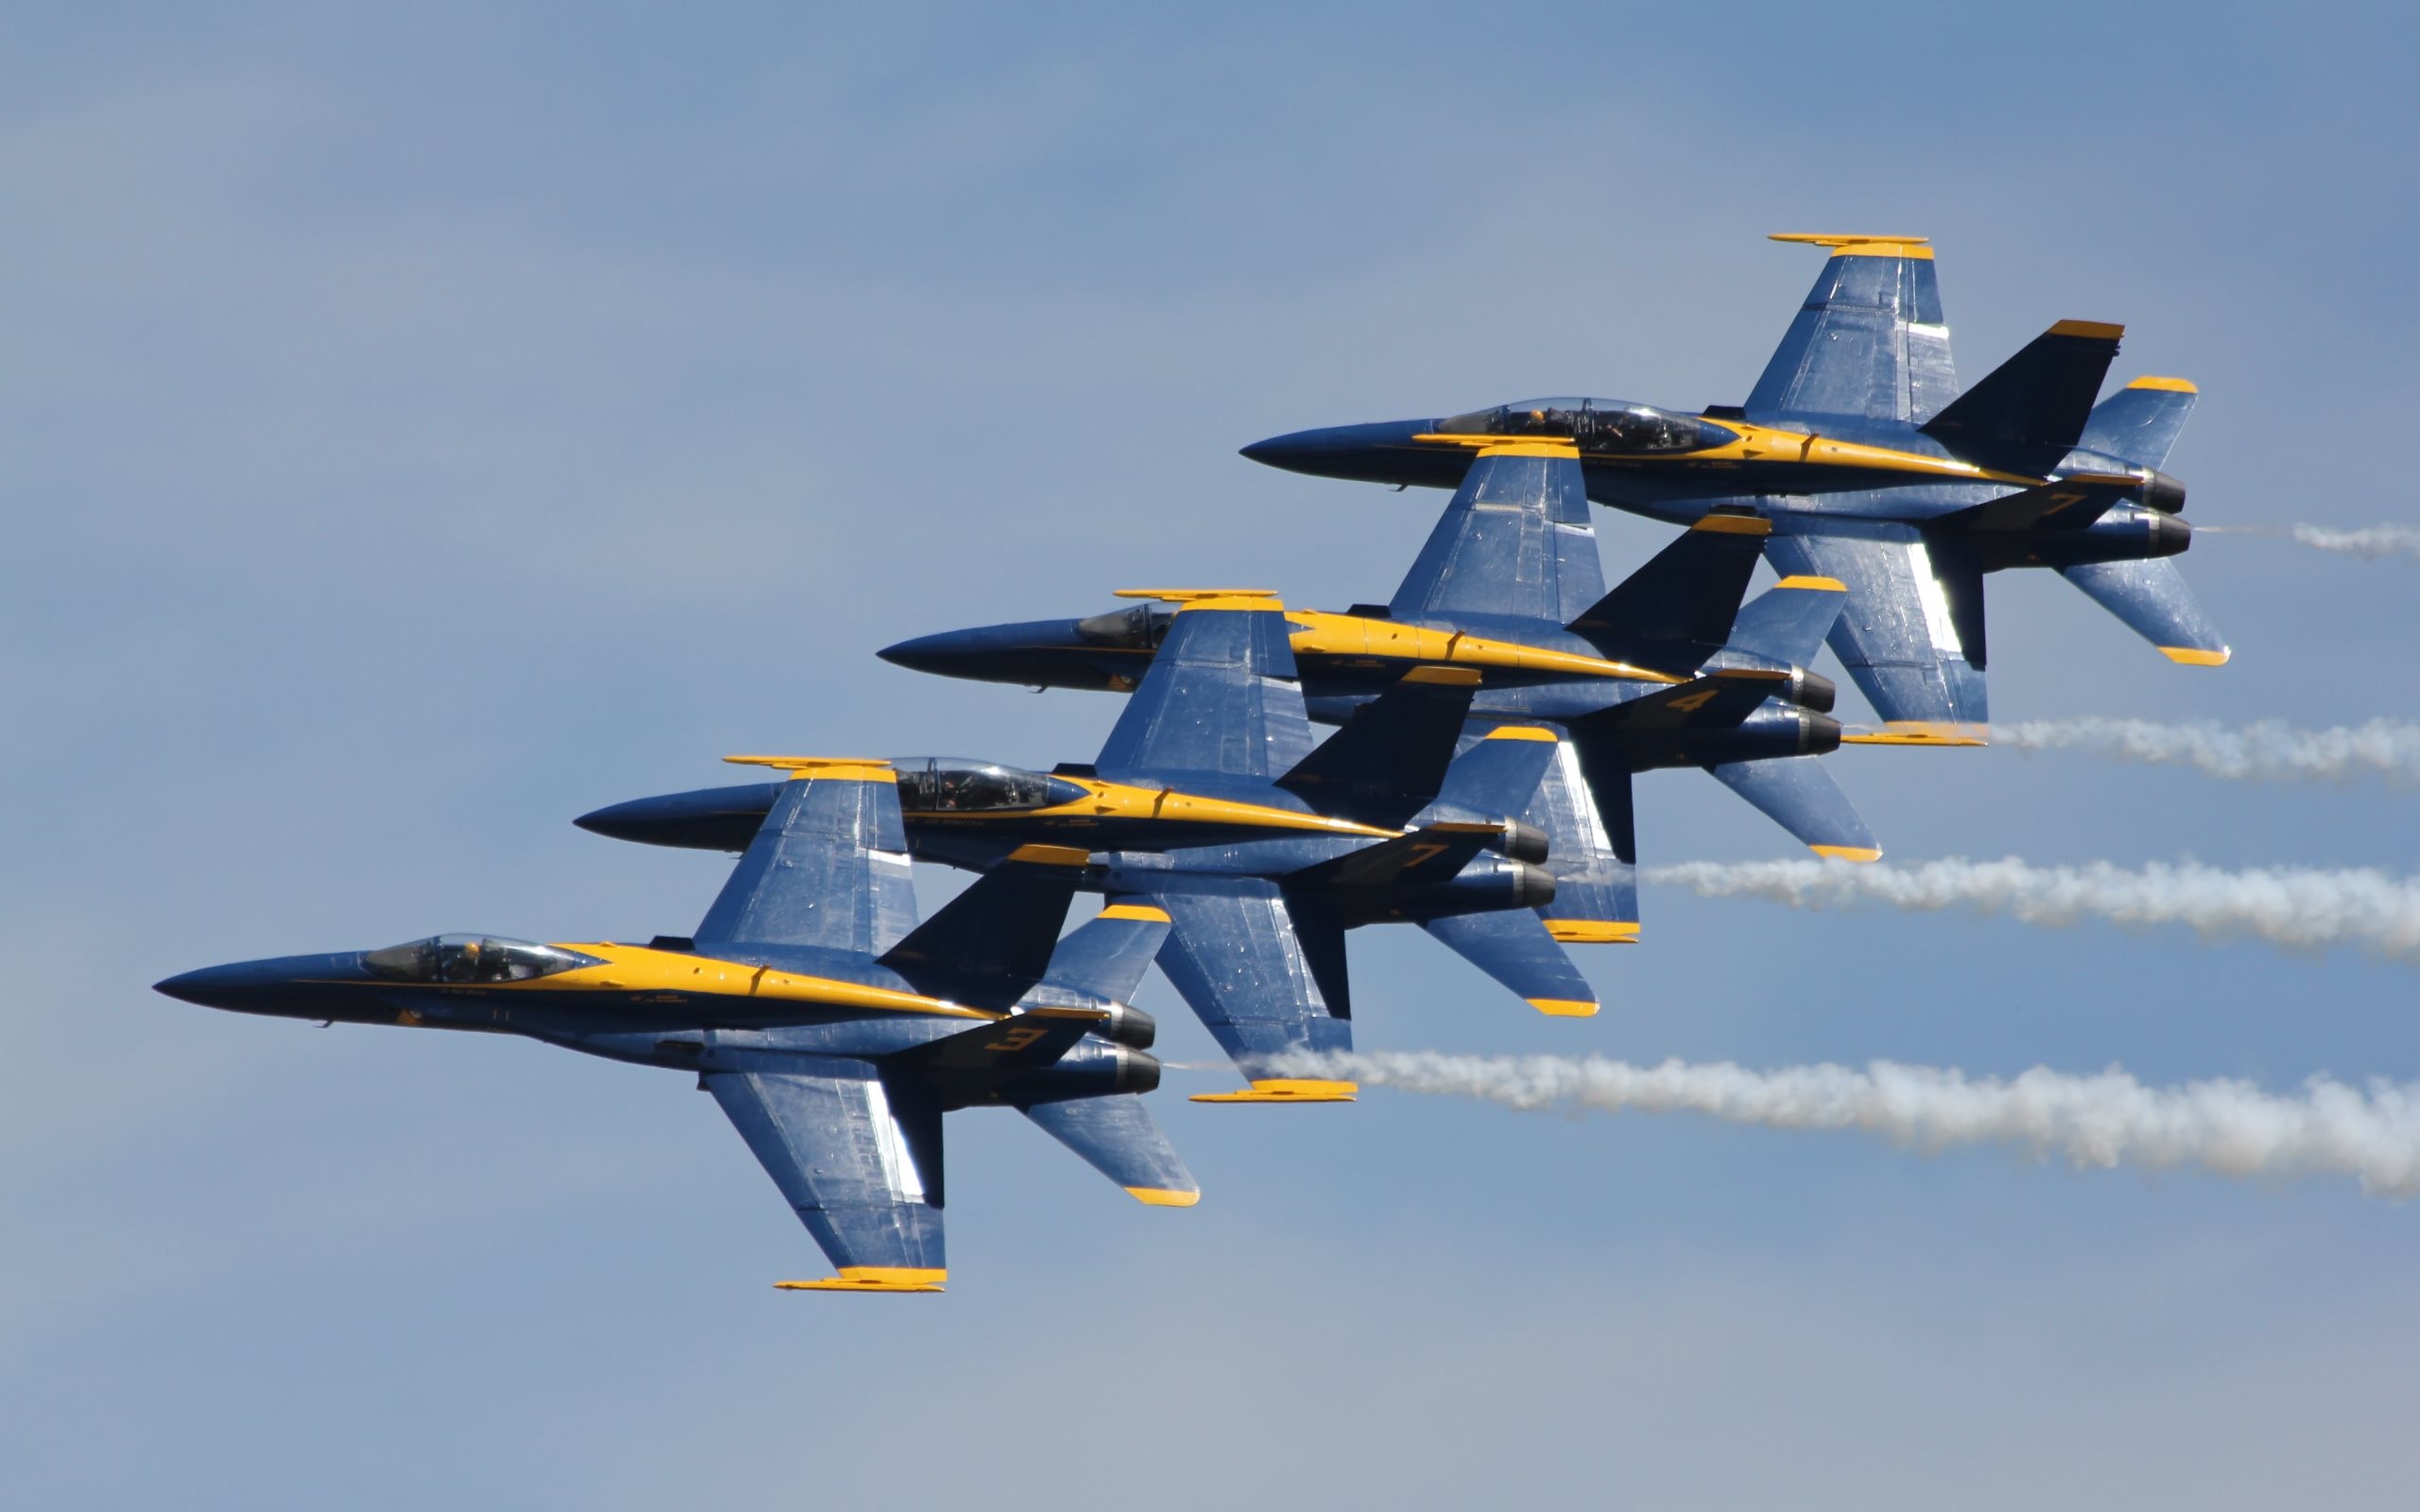 2560x1600 4K HD Wallpaper: Air Show with Blue Angels F-18 Squadron